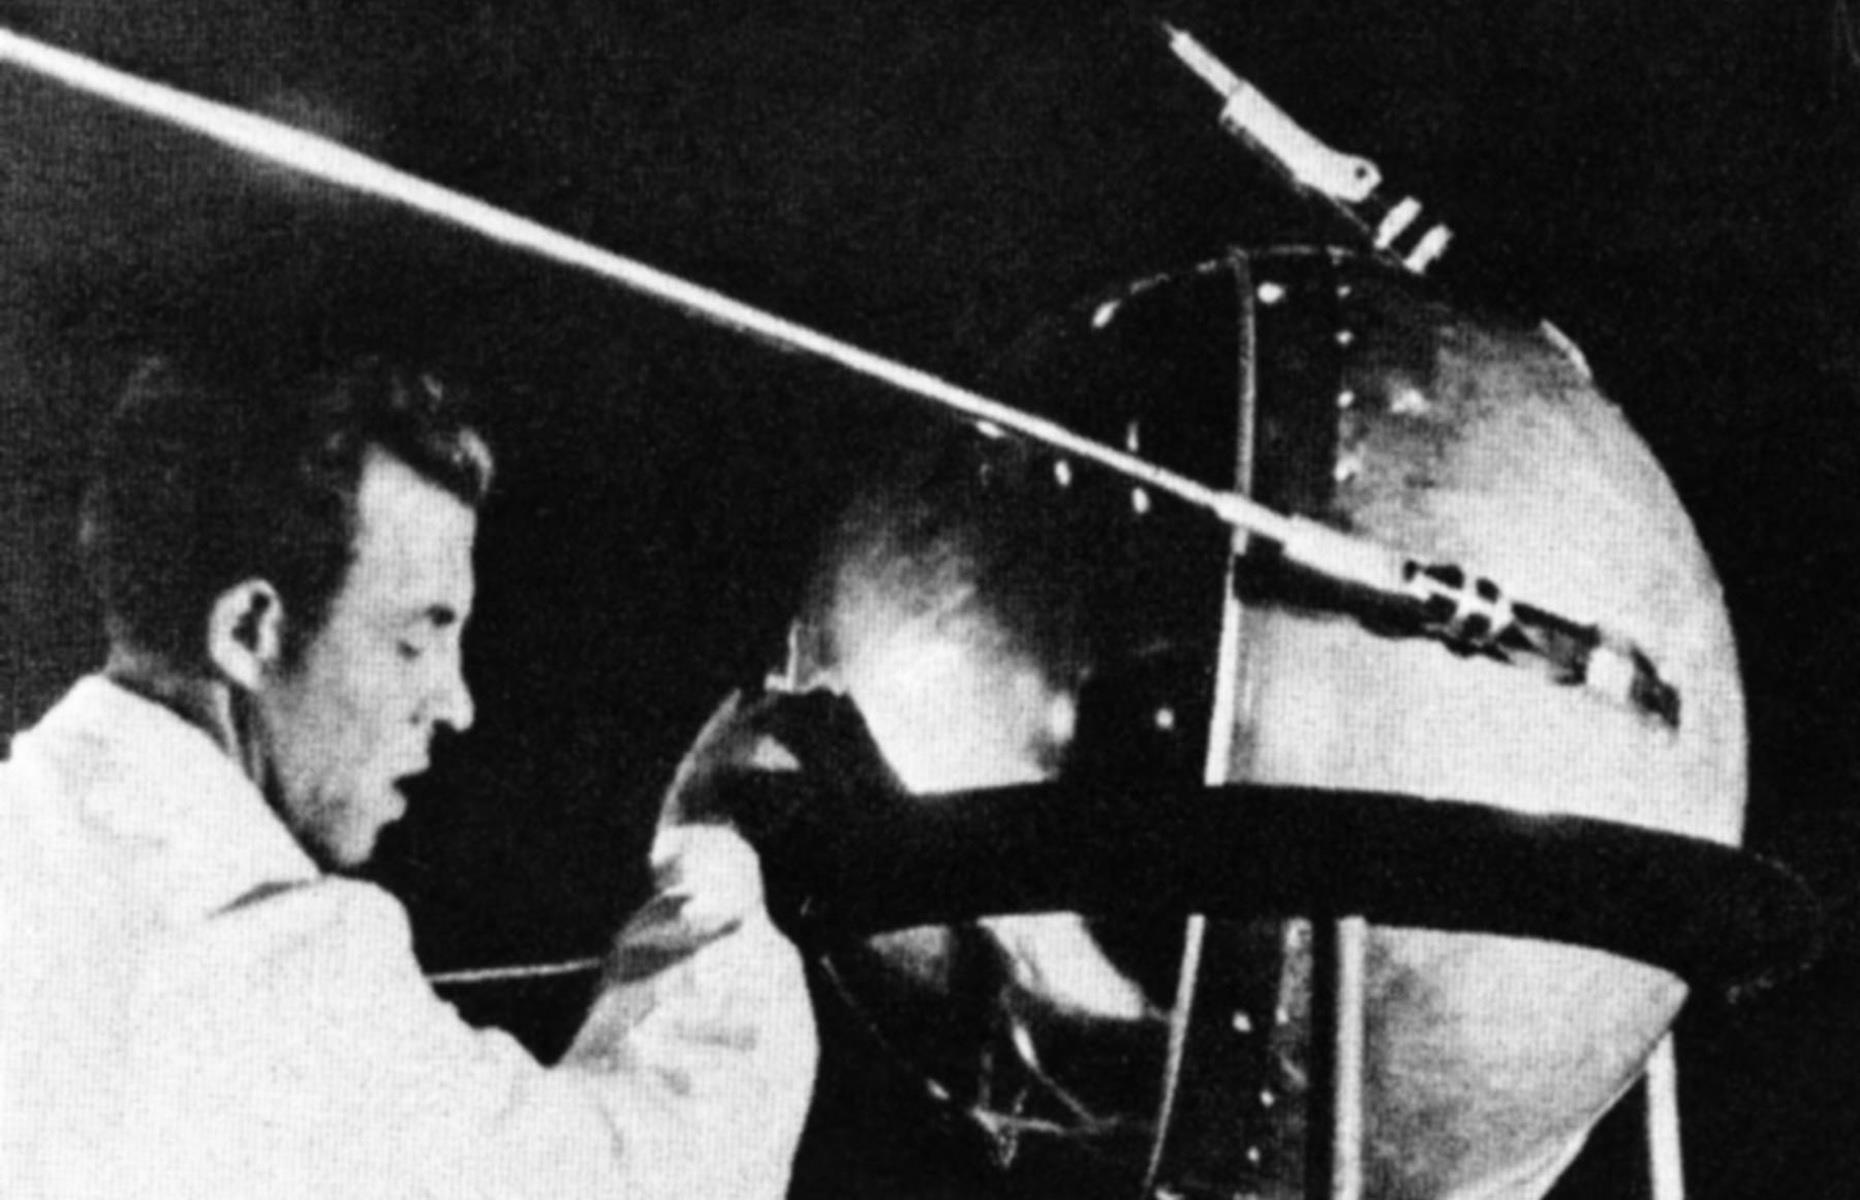 <p>The USSR launched Sputnik 1, the world's very first artificial satellite, on October 4, 1957. The pioneering spacecraft remained in orbit for three months before it fell to Earth and burned up in the atmosphere.</p>